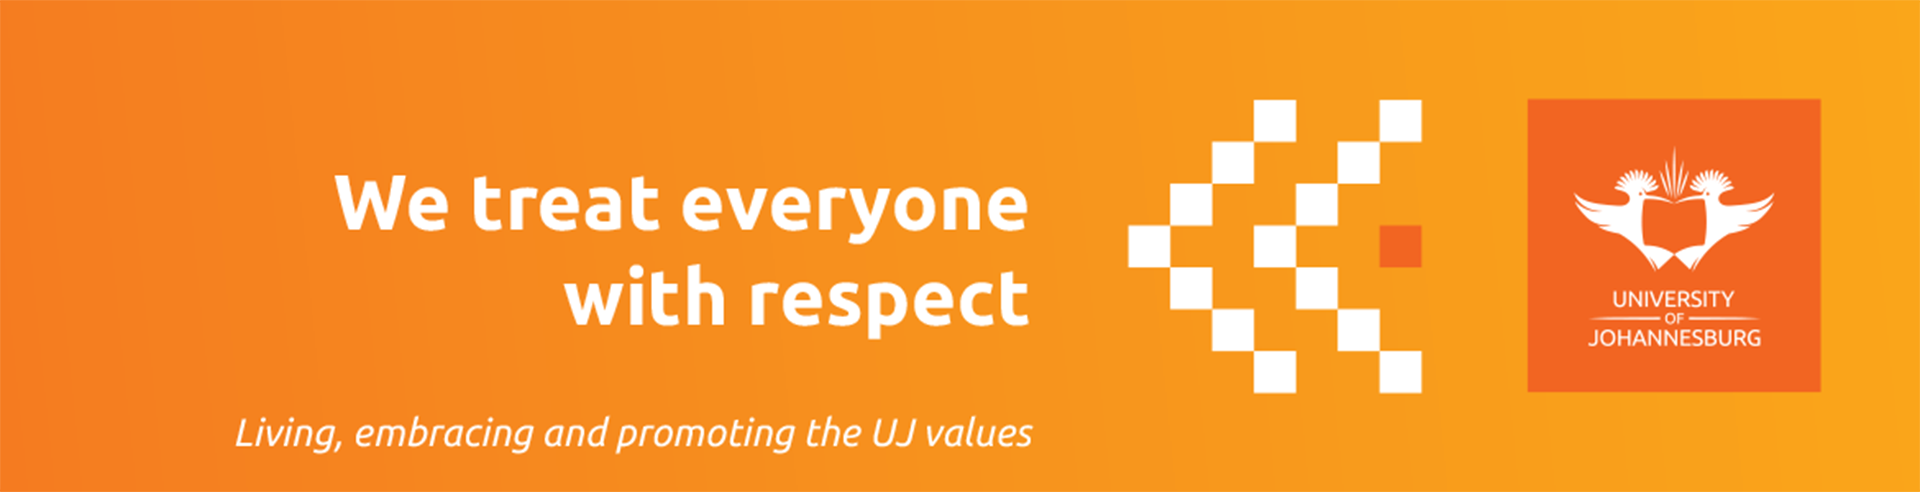 Uj Values Expressions Posters 2020 Ulink 1170x300mm 2